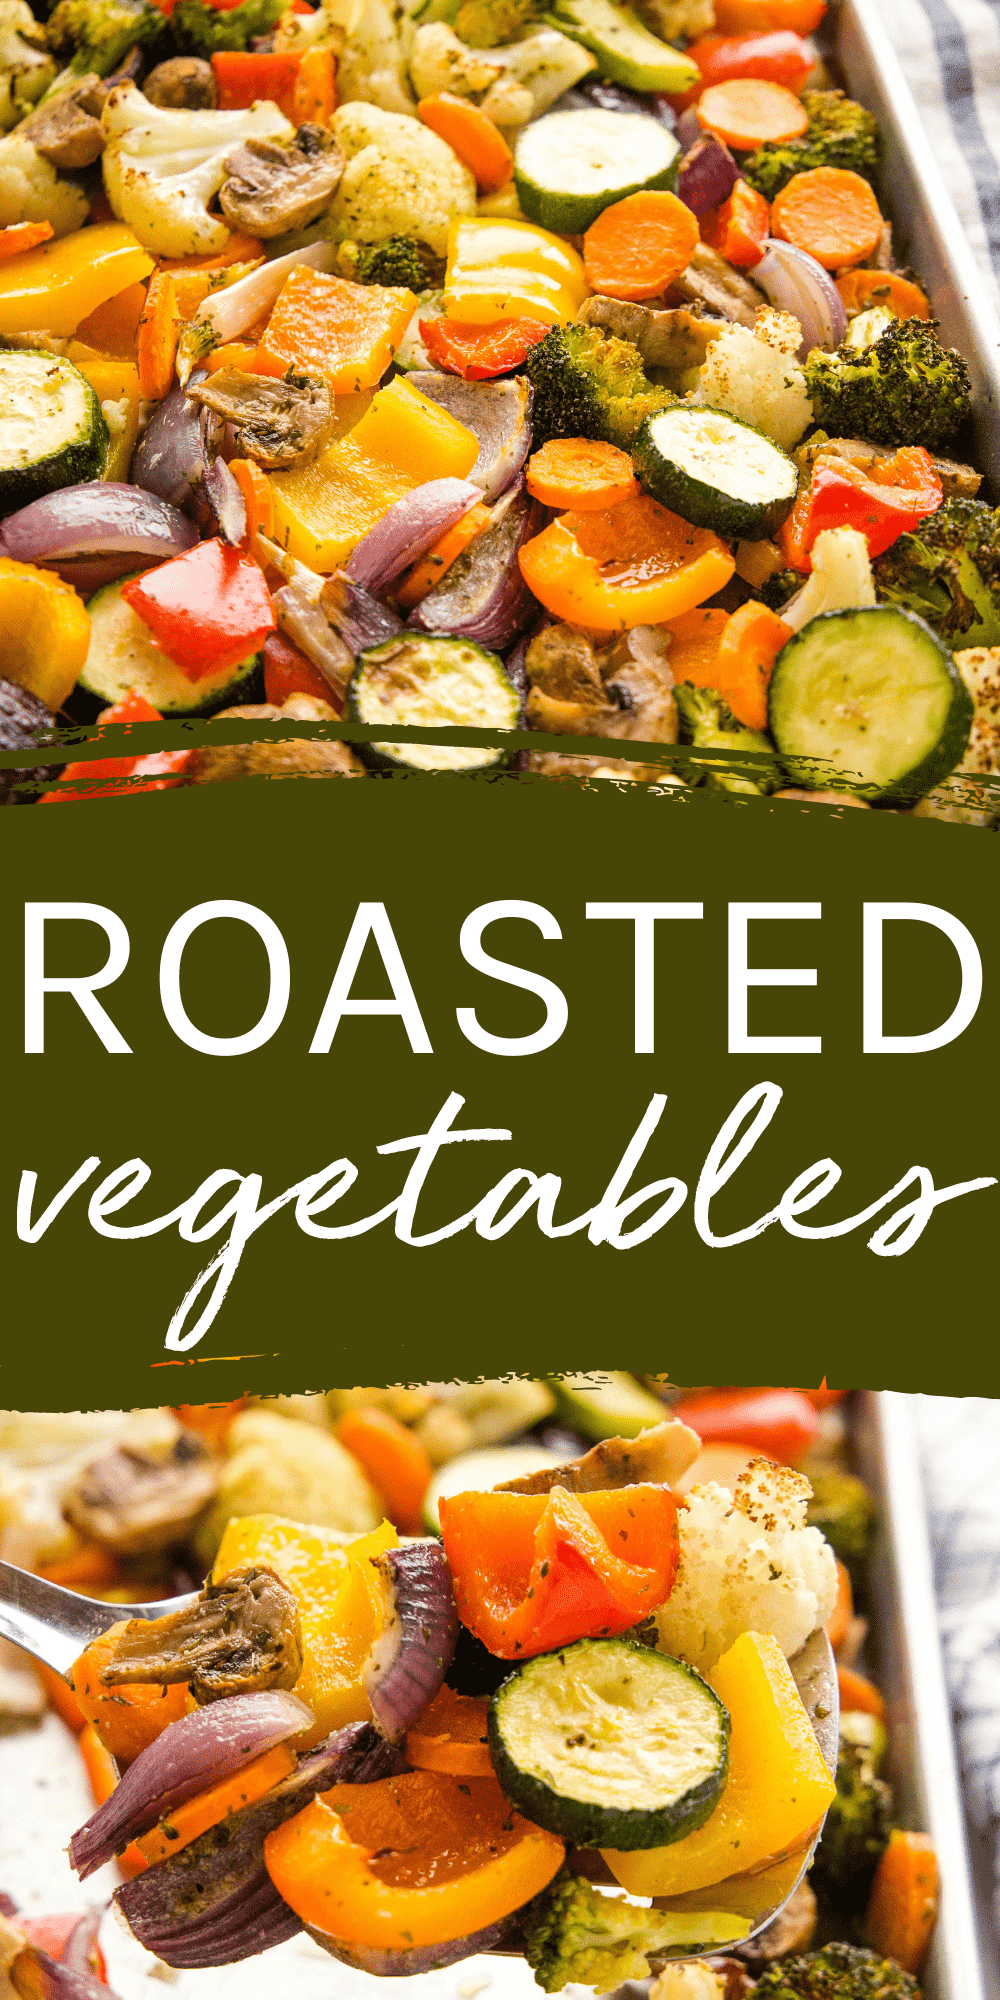 This Roasted Vegetables Recipe is the perfect healthy side dish - tender and juicy veggies with the best oven-roasted flavour. Ready in under 25 minutes! Recipe from thebusybaker.ca! #ovenroastedvegetables #roastedvegetables #veggies #sidedish #easysidedish #healthysidedish #roastedveggies #vegetarian #vegan #plantbased via @busybakerblog